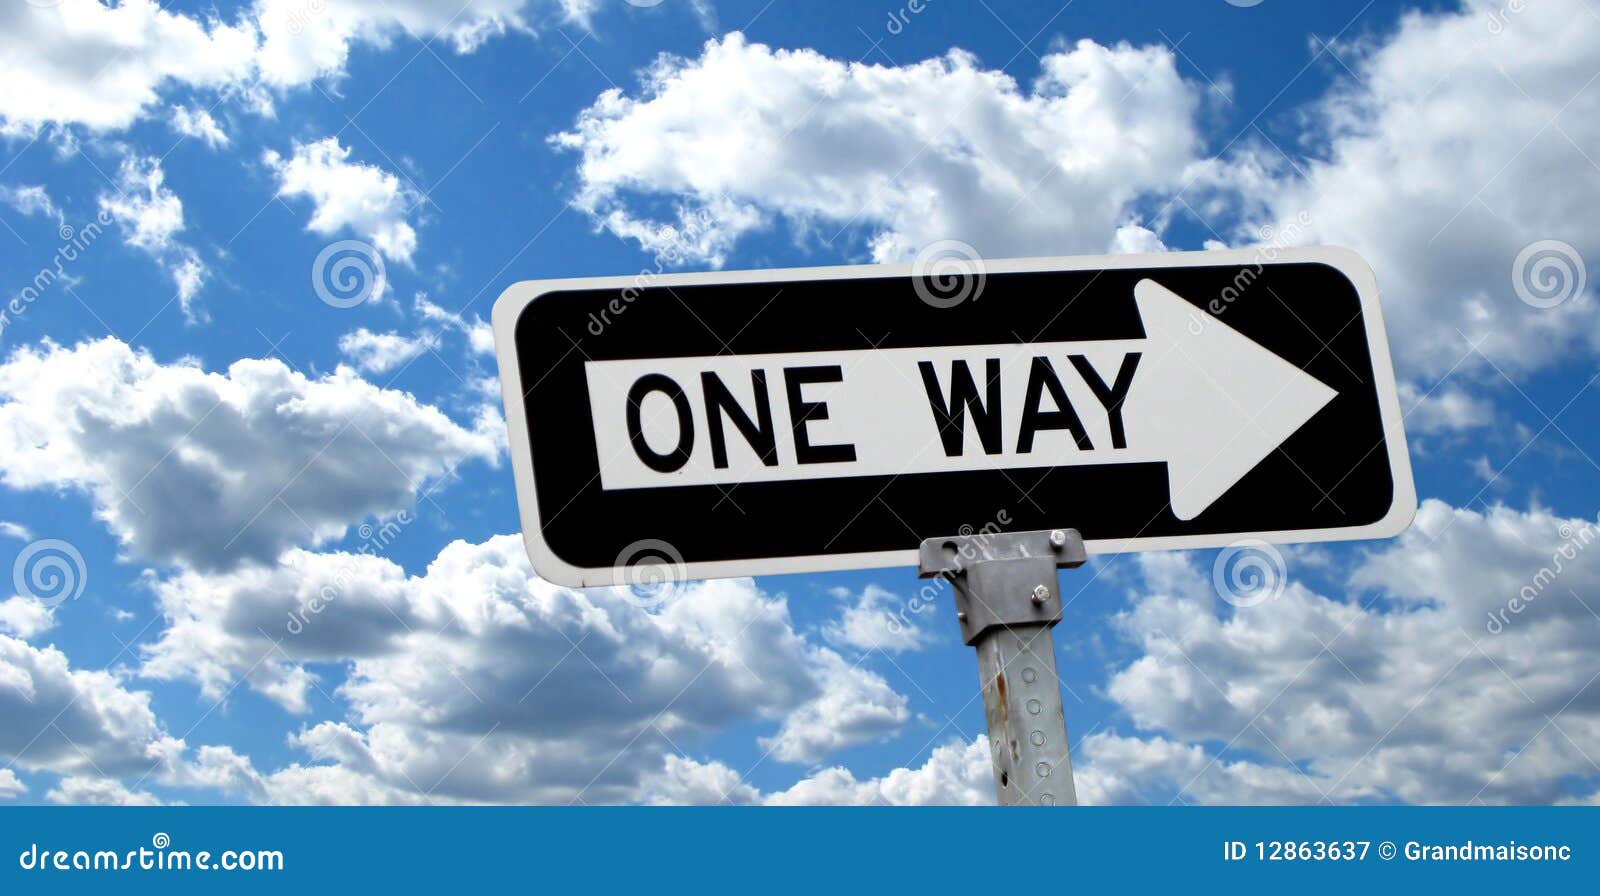 One Way Road Sign Royalty Free Stock Photography - Image ...
 One Way Street Signs